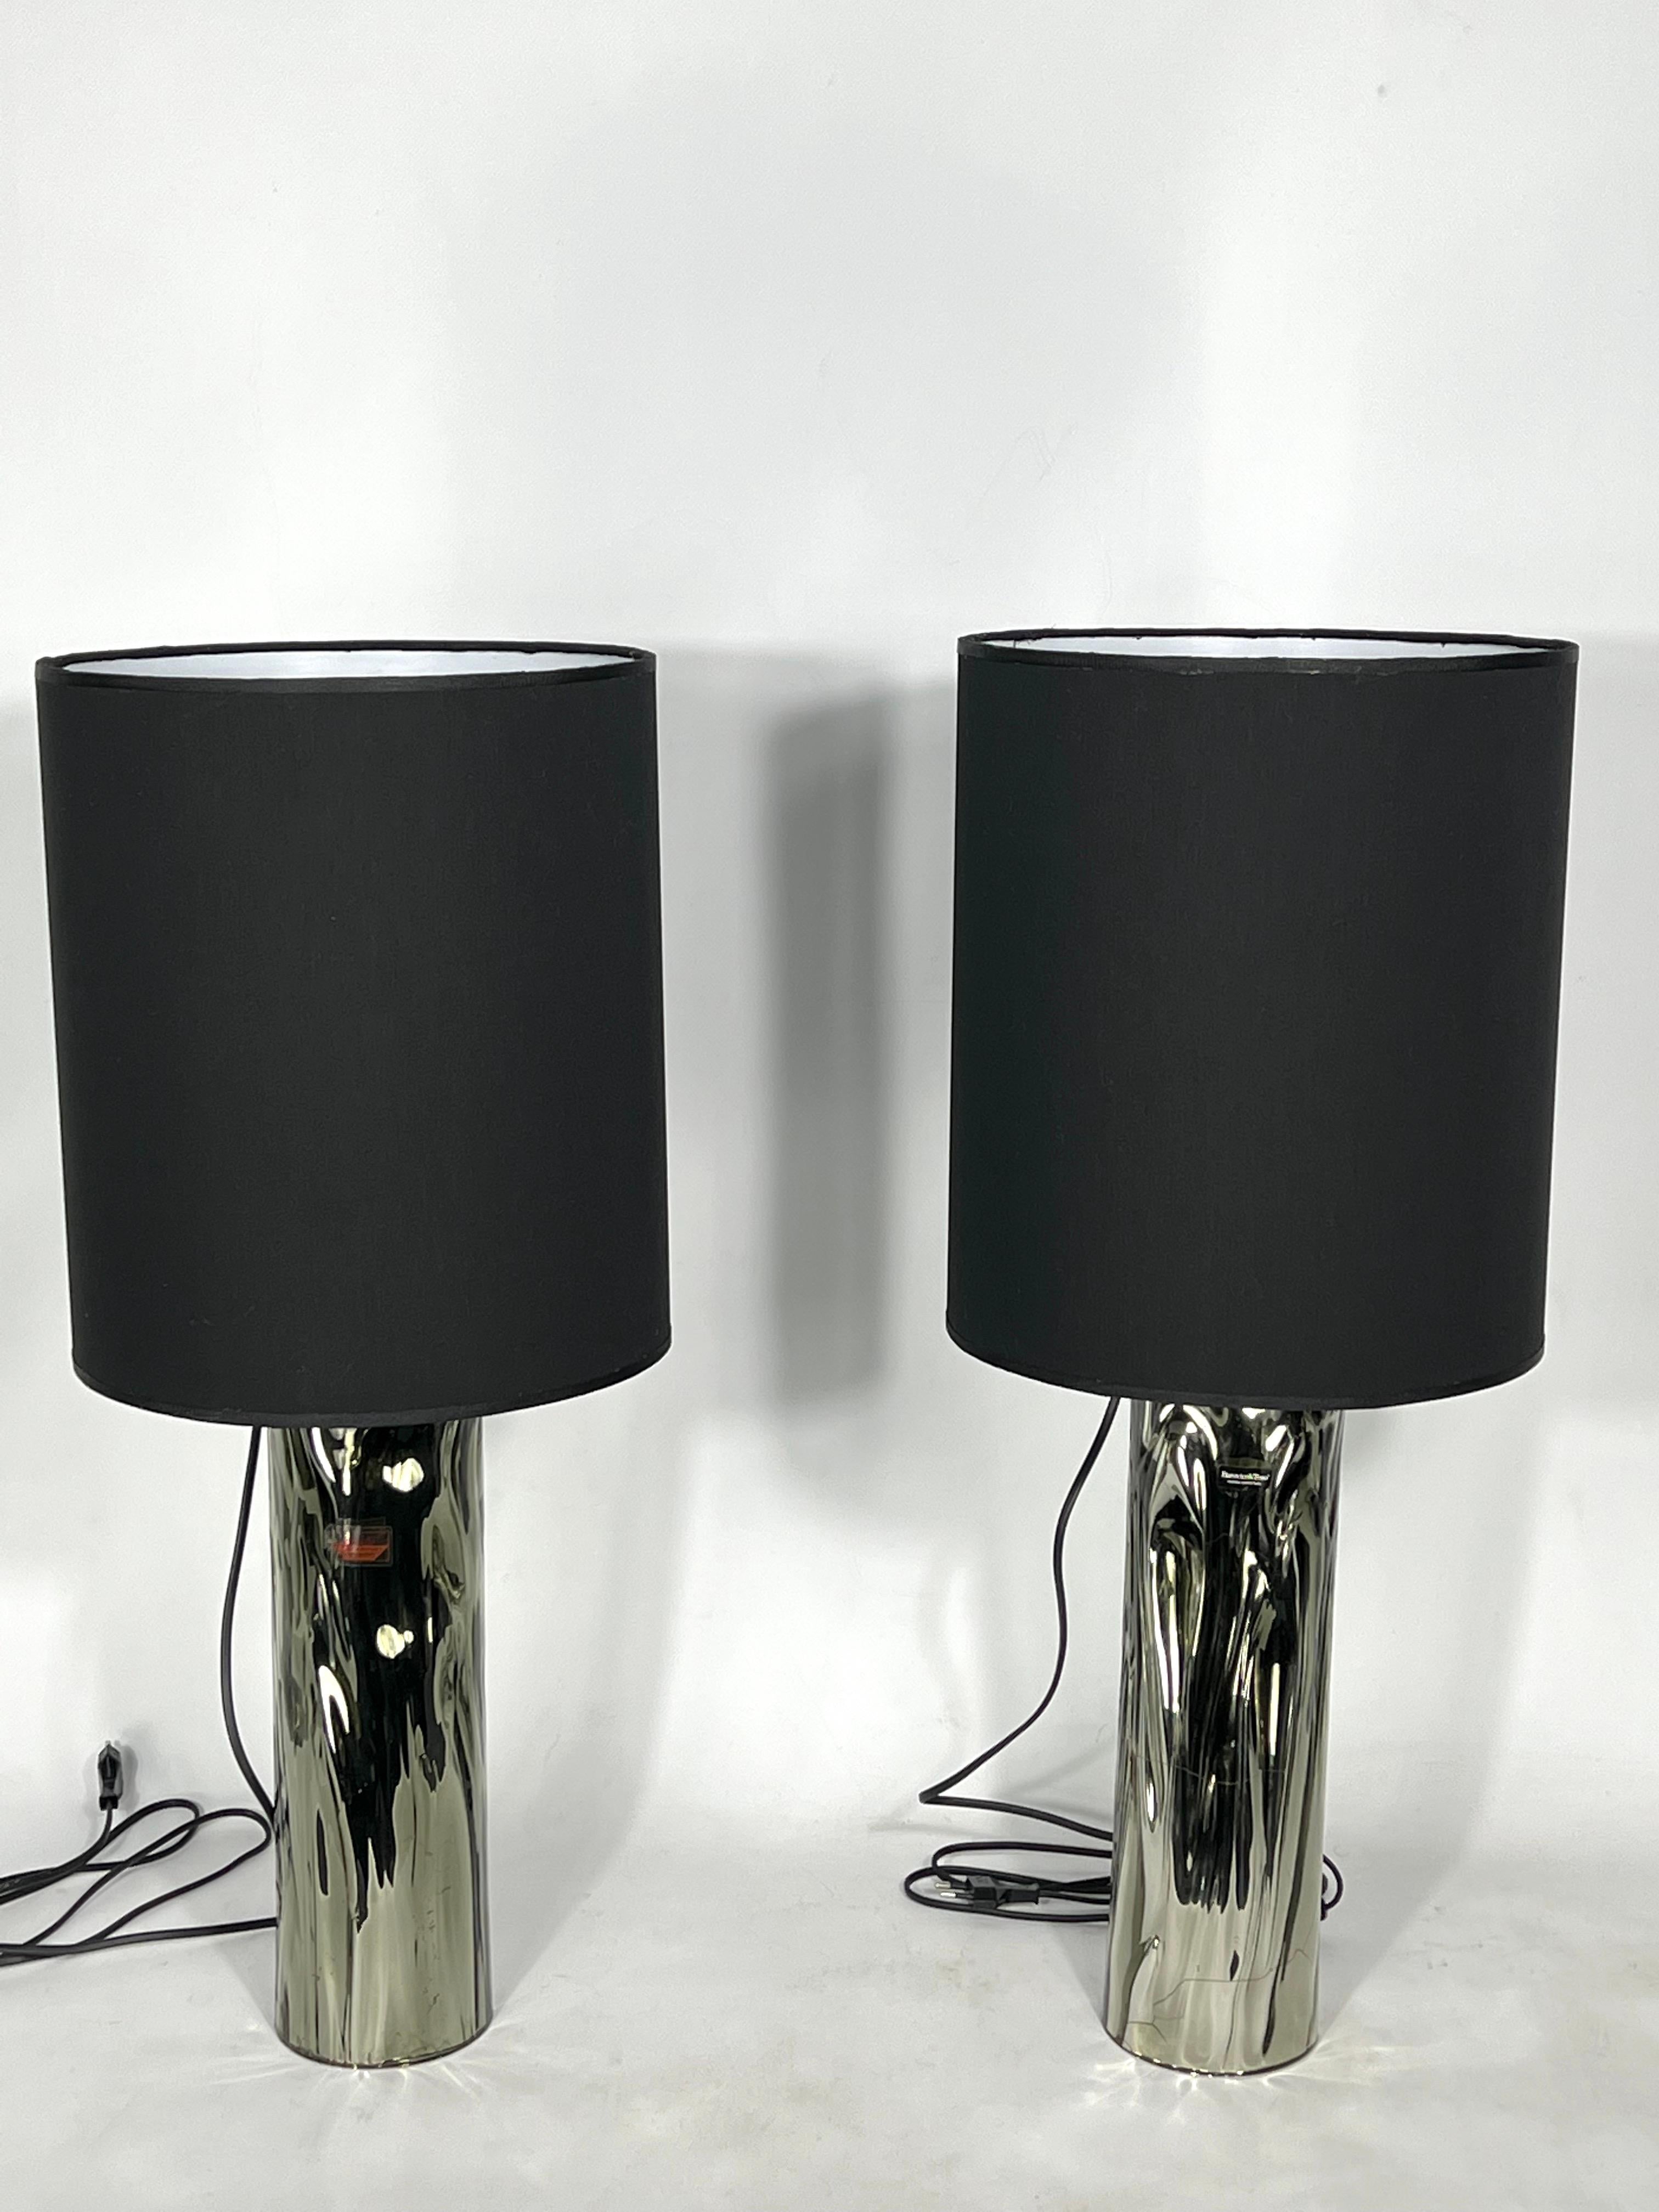 Good vintage condition with normal trace of age and use for this set of two table lamps produced in Italy during the 70s by Barovier & Toso. Labeled. Each one mounts one socket for E27 lamp. Full working with EU standard, adaptable on demand for USA